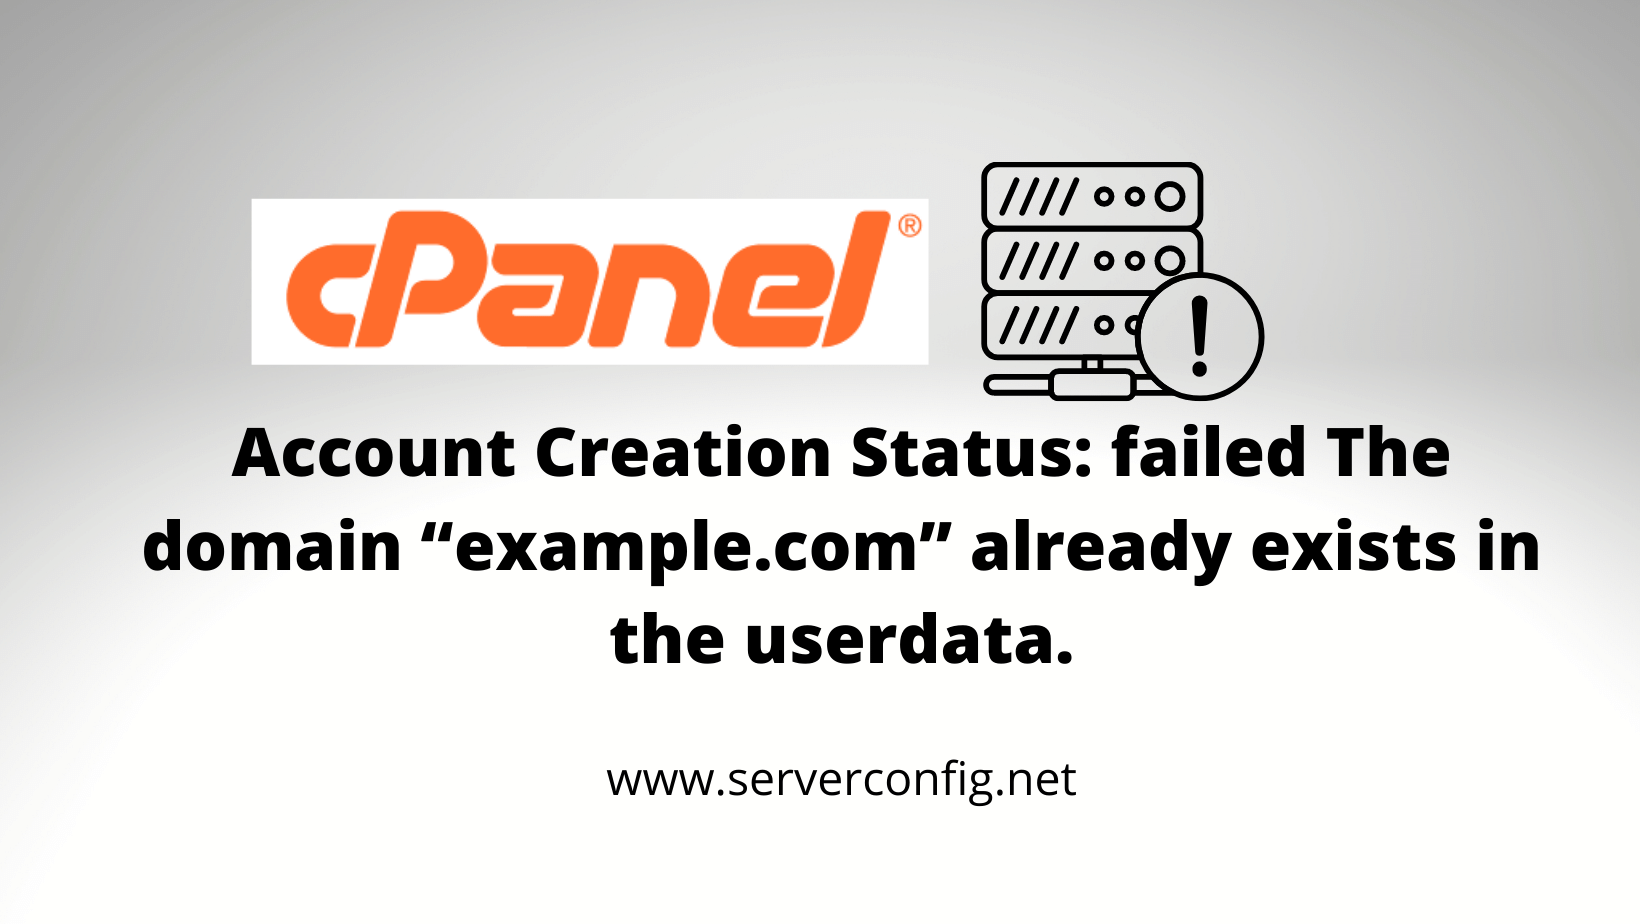 Account Creation Status failed The domain “example.com” already exists in the userdata.